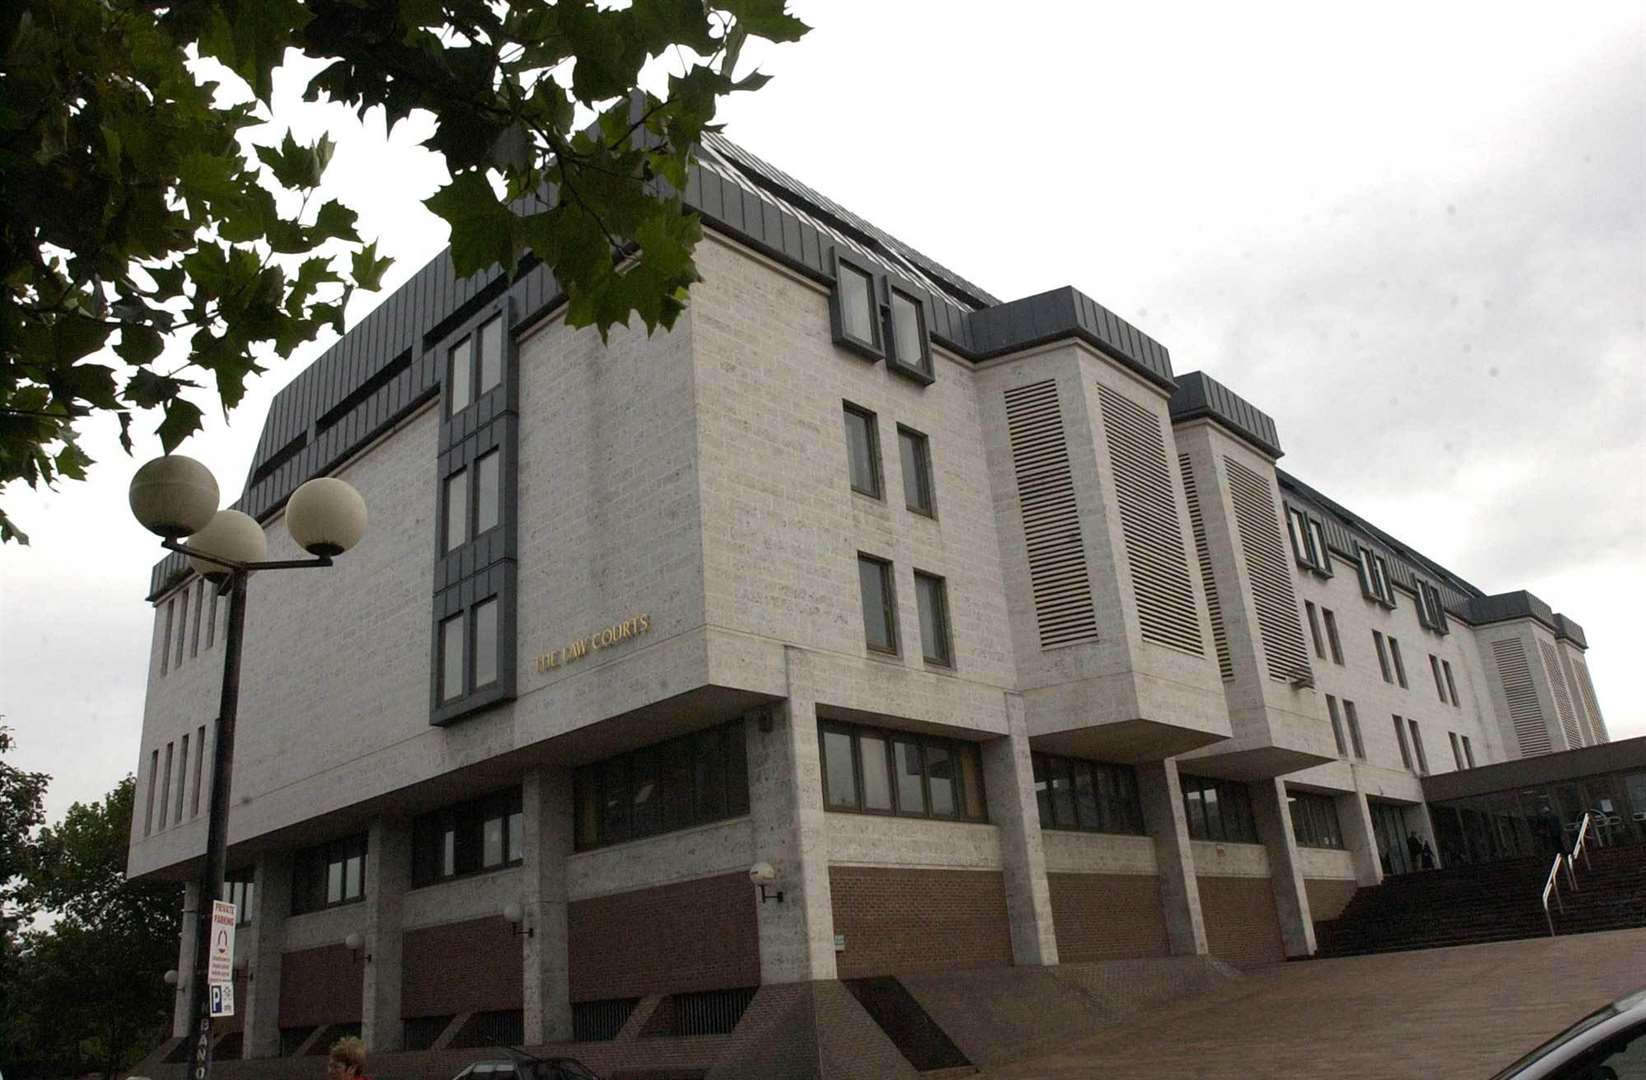 Moon was sentenced at Maidstone Crown Court